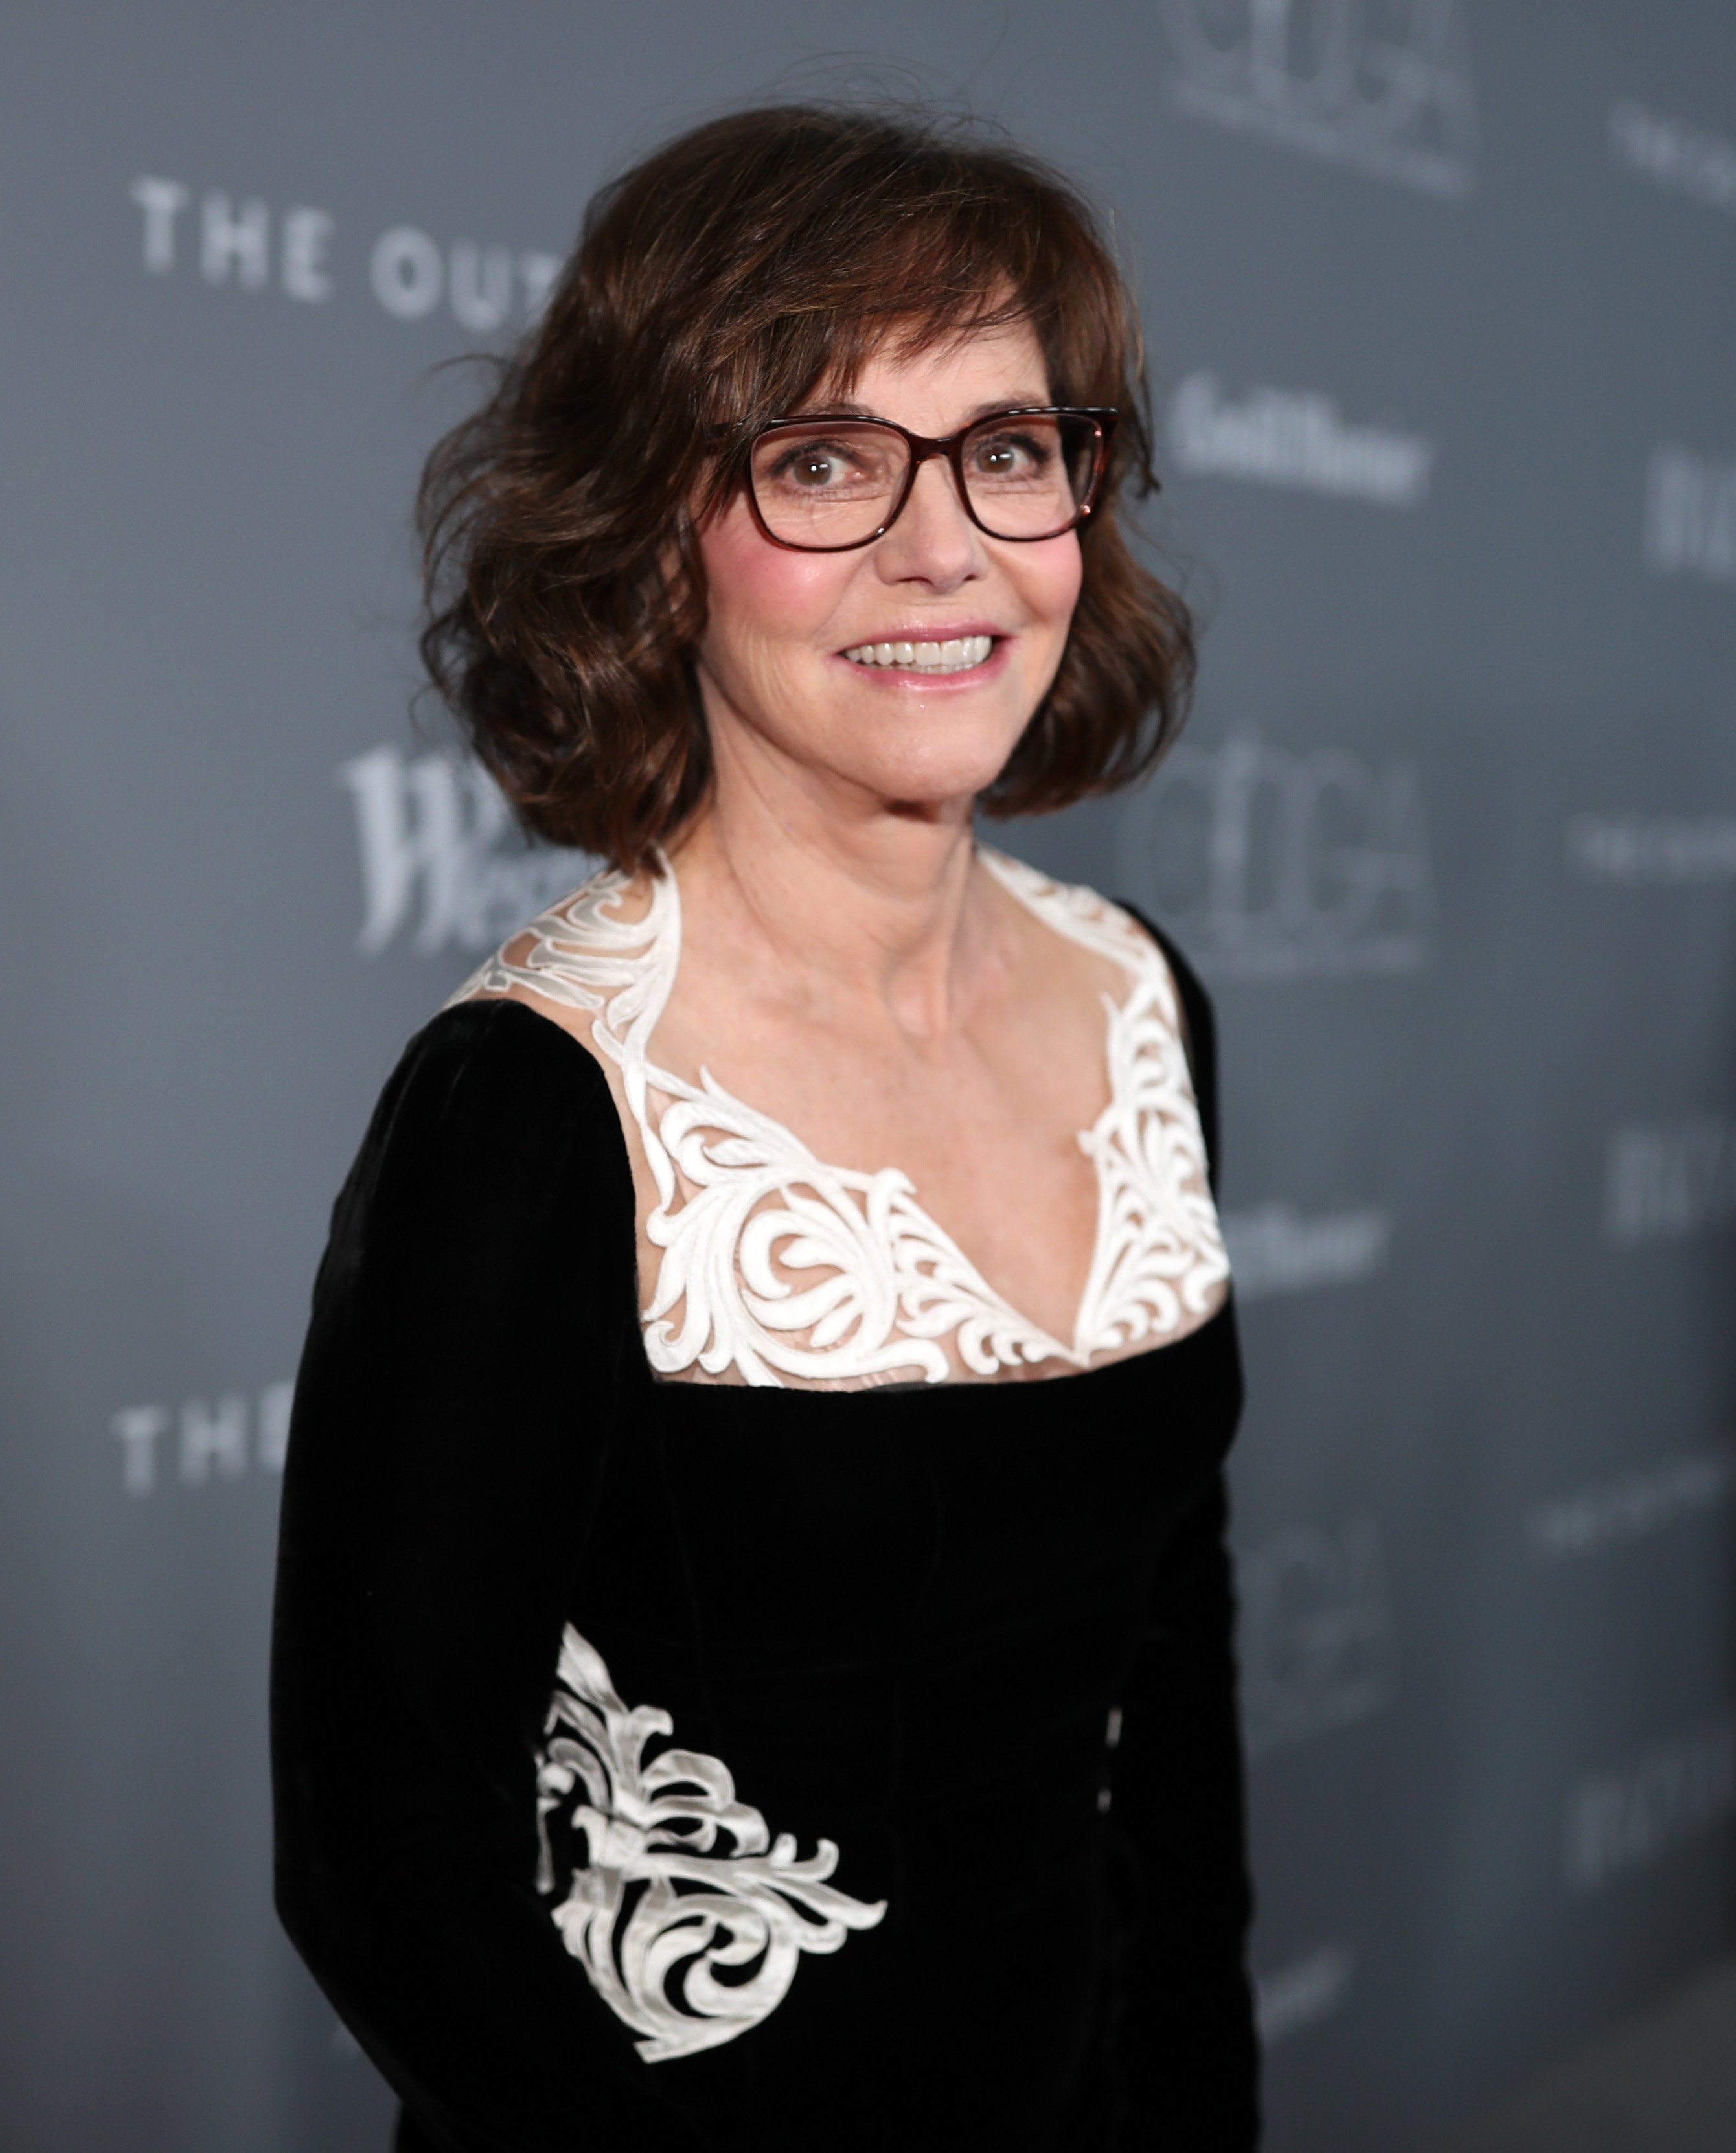 Sally Field attends the Costume Designers Guild Awards at The Beverly Hilton Hotel on February 20, 2018, in Beverly Hills, California. | Source: Getty Images.